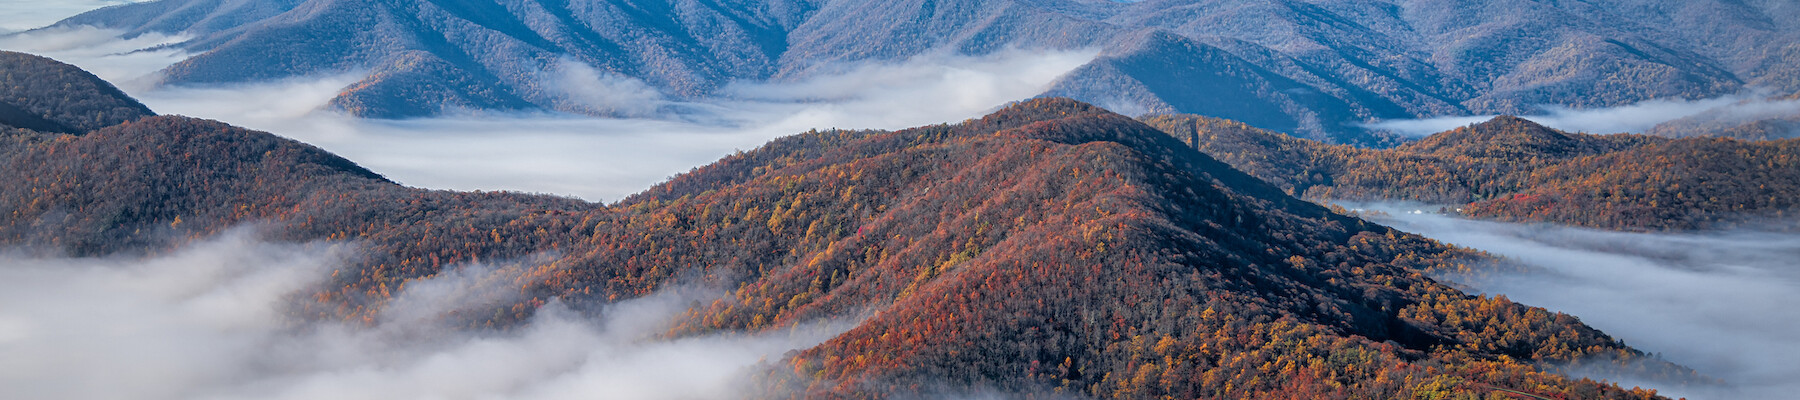 A serene landscape with rolling mountains covered in autumn foliage, blanketed by a layer of fog under a clear blue sky.